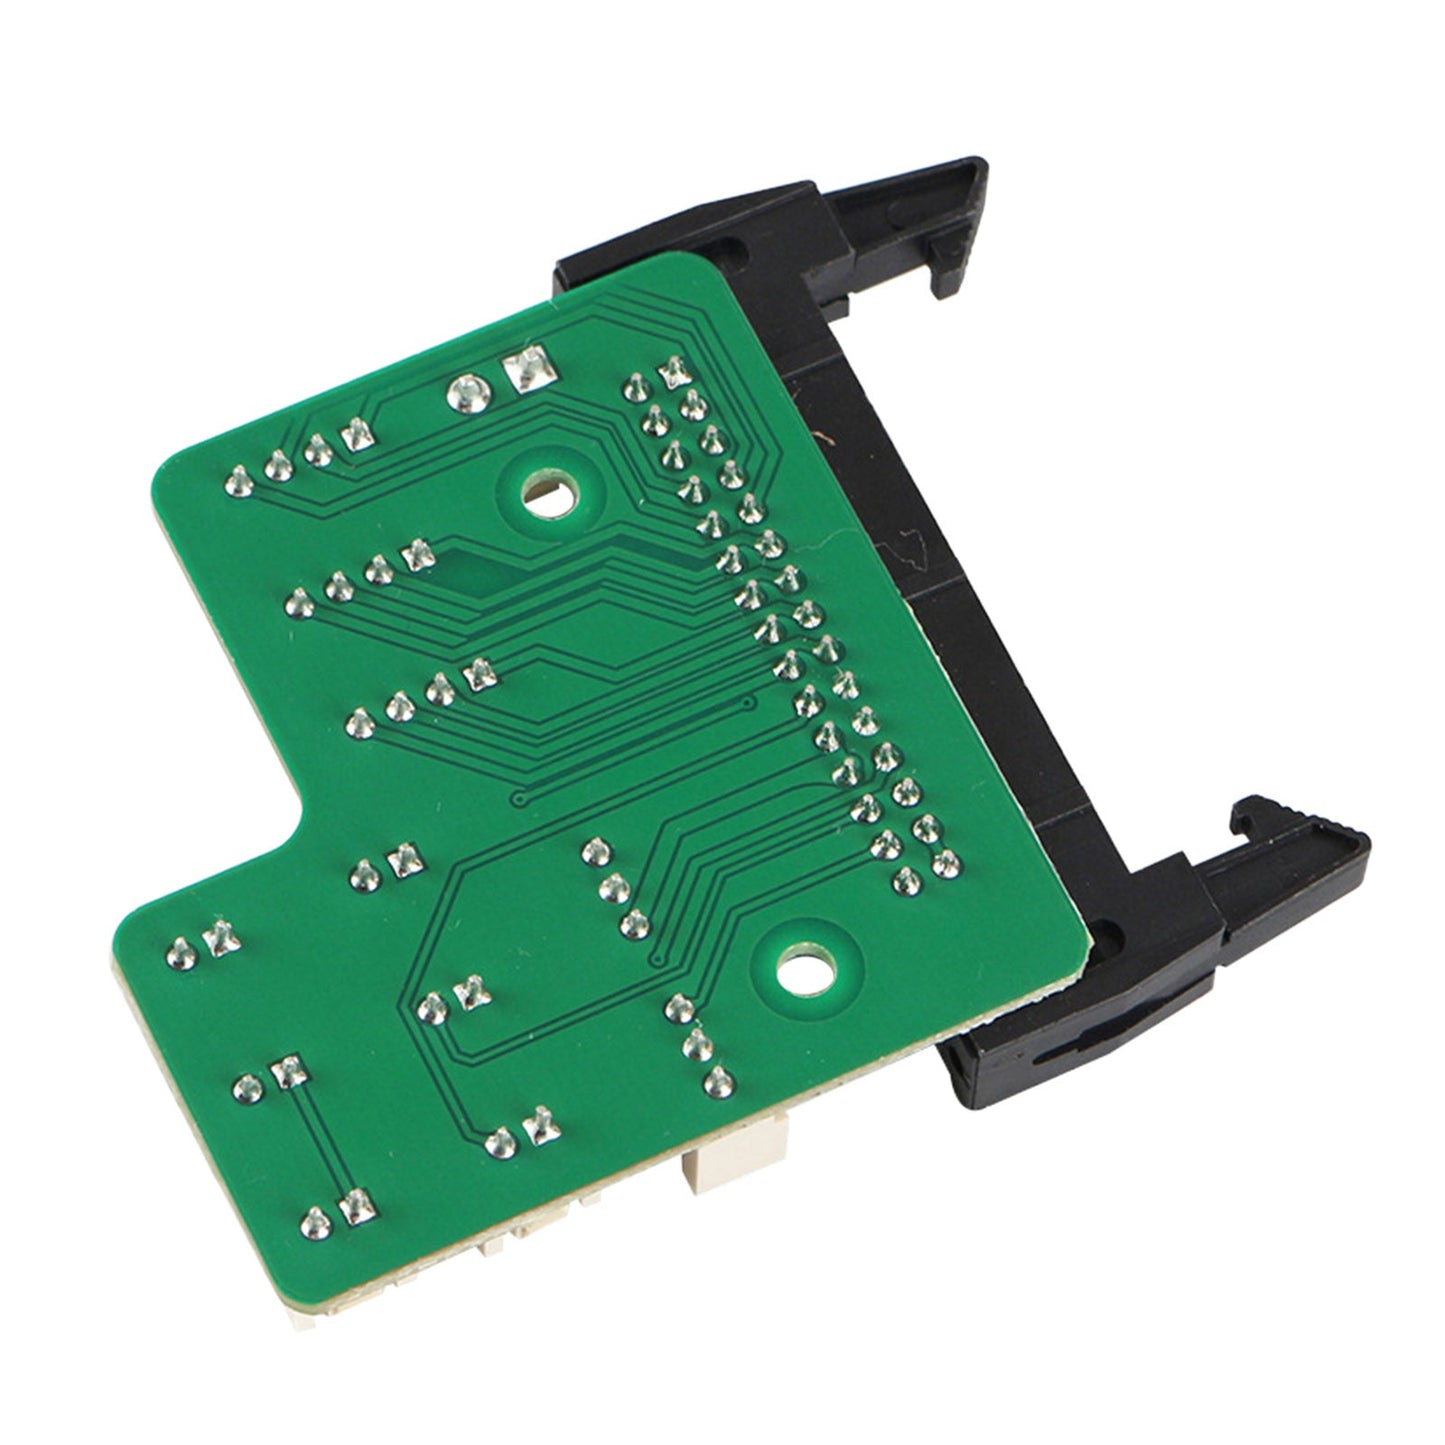 Transfer Replace Board Motherboard Main Display for CR-10S PRO 3D Printer